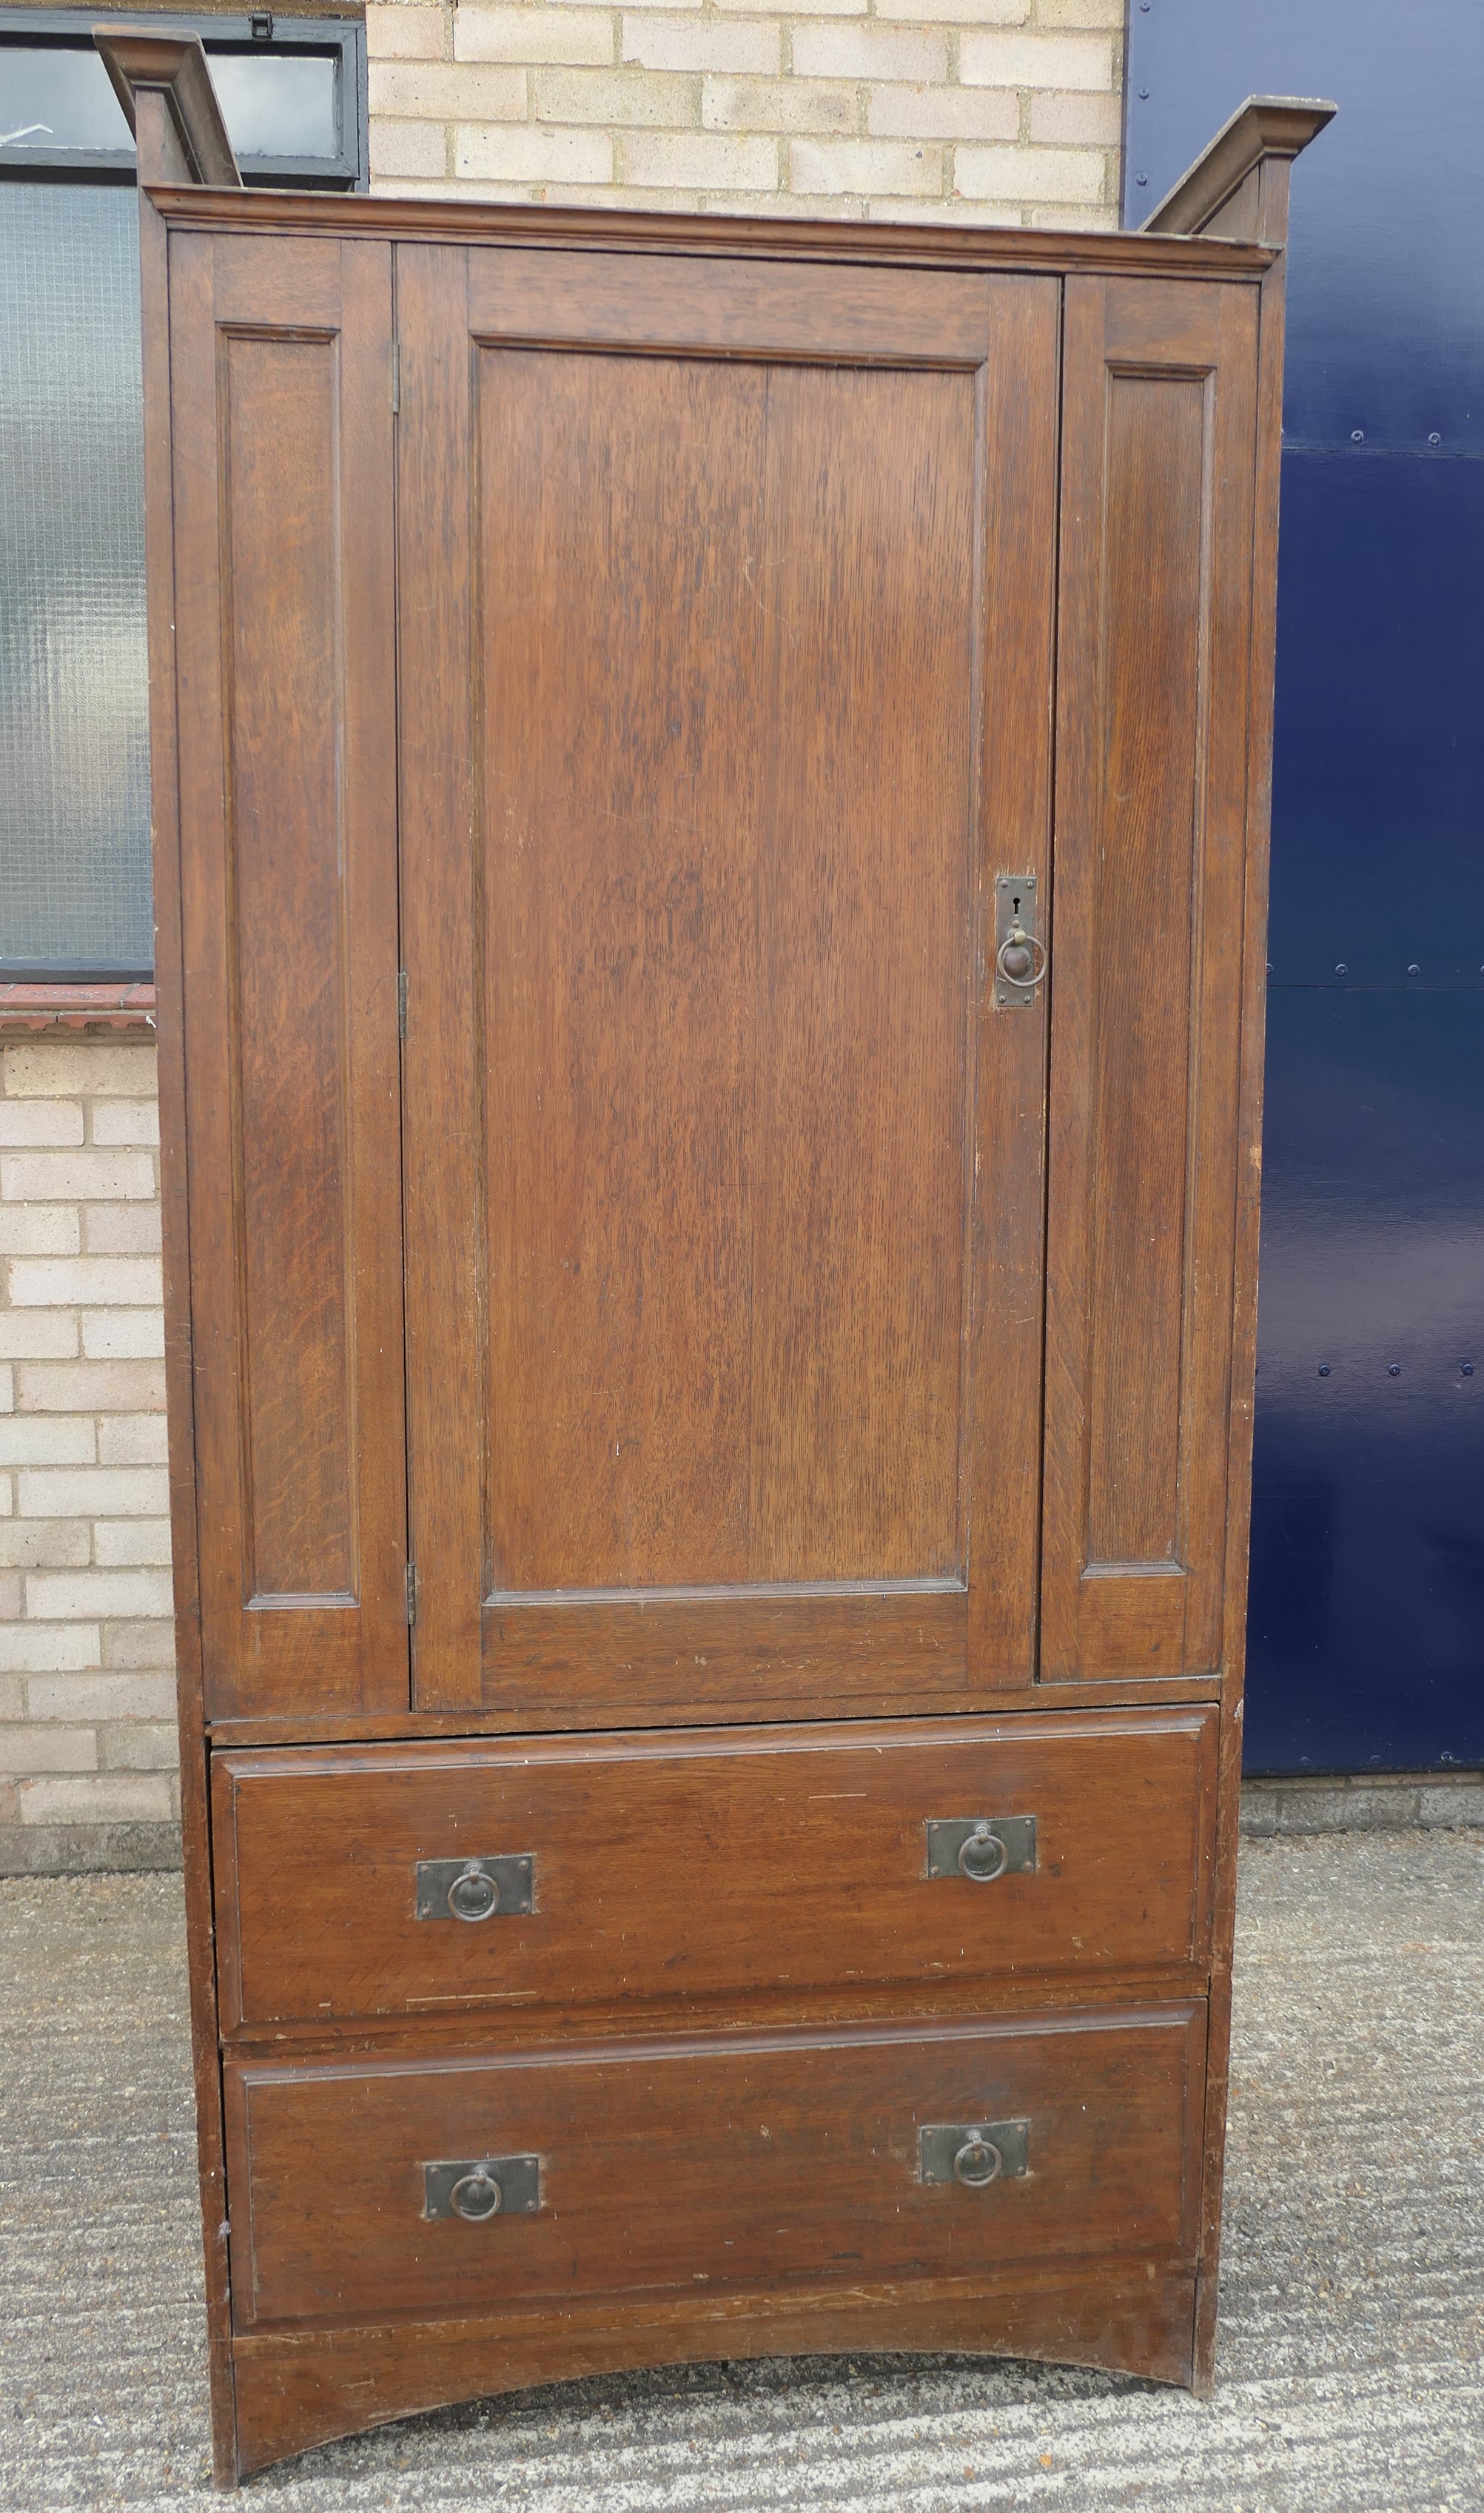 In the Manner of Heals, an Arts and Crafts oak compactum wardrobe. 199.5 cm high x 95 cm wide.